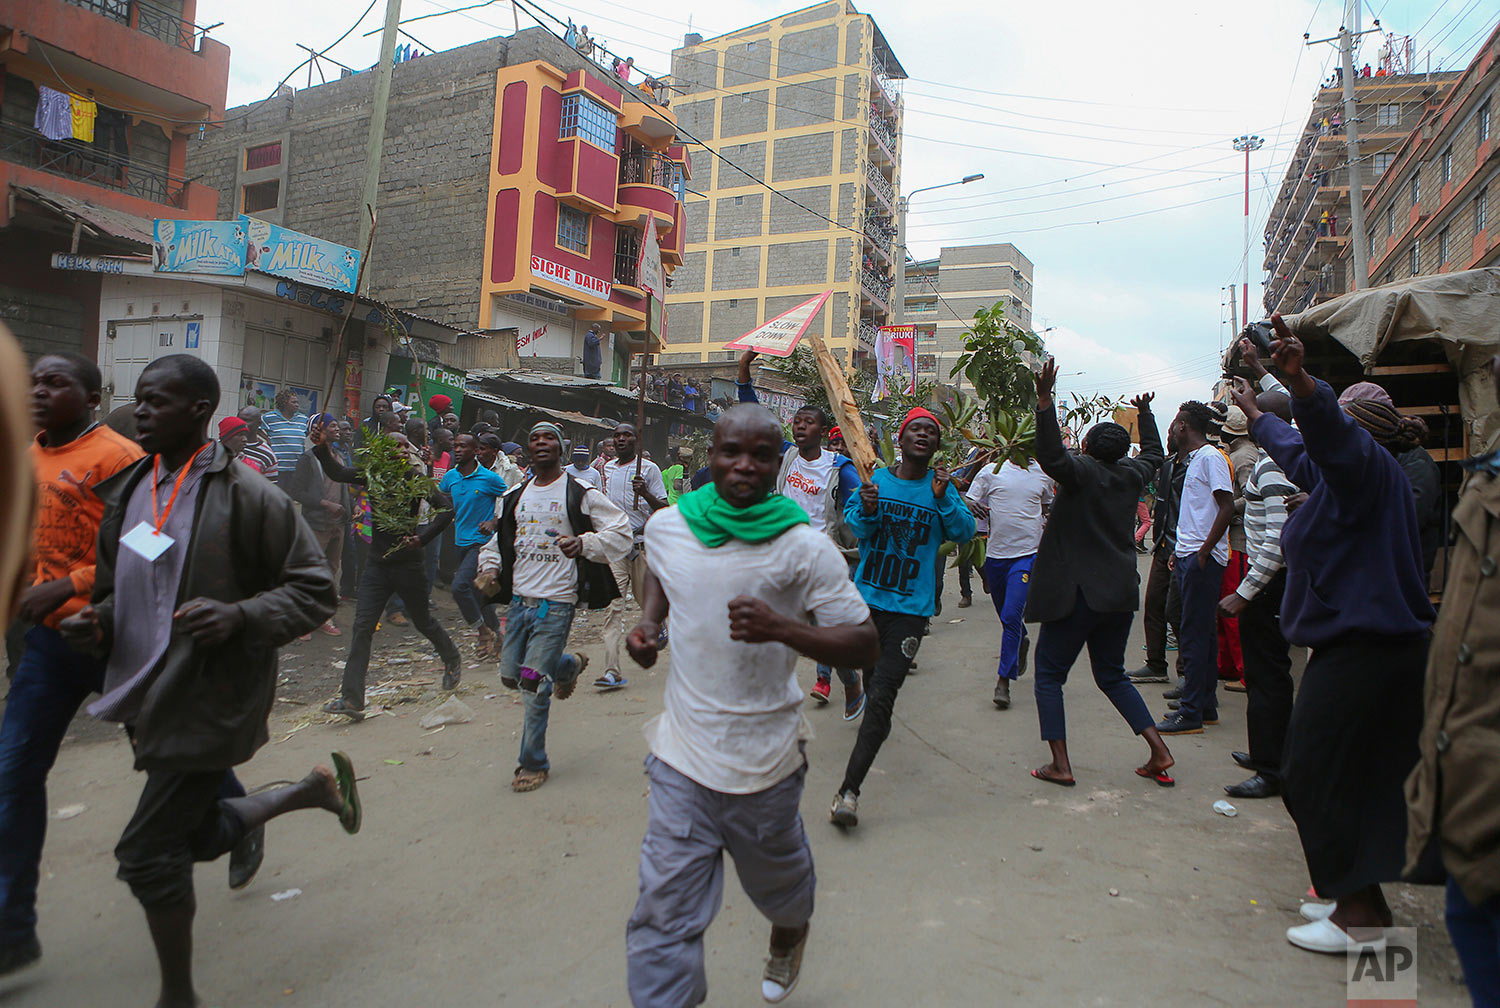  Residents of the Mathare area of Nairobi, Kenya, take to the streets by blocking roads with burning tyres to protest in support of Kenyan opposition leader and presidential candidate Raila Odinga, Wednesday, Aug. 9, 2017. Odinga alleges that hackers manipulated the Tuesday election results which appear to show President Uhuru Kenyatta has a wide lead over Odinga. (AP Photo. (AP Photo/Brian Inganga) 